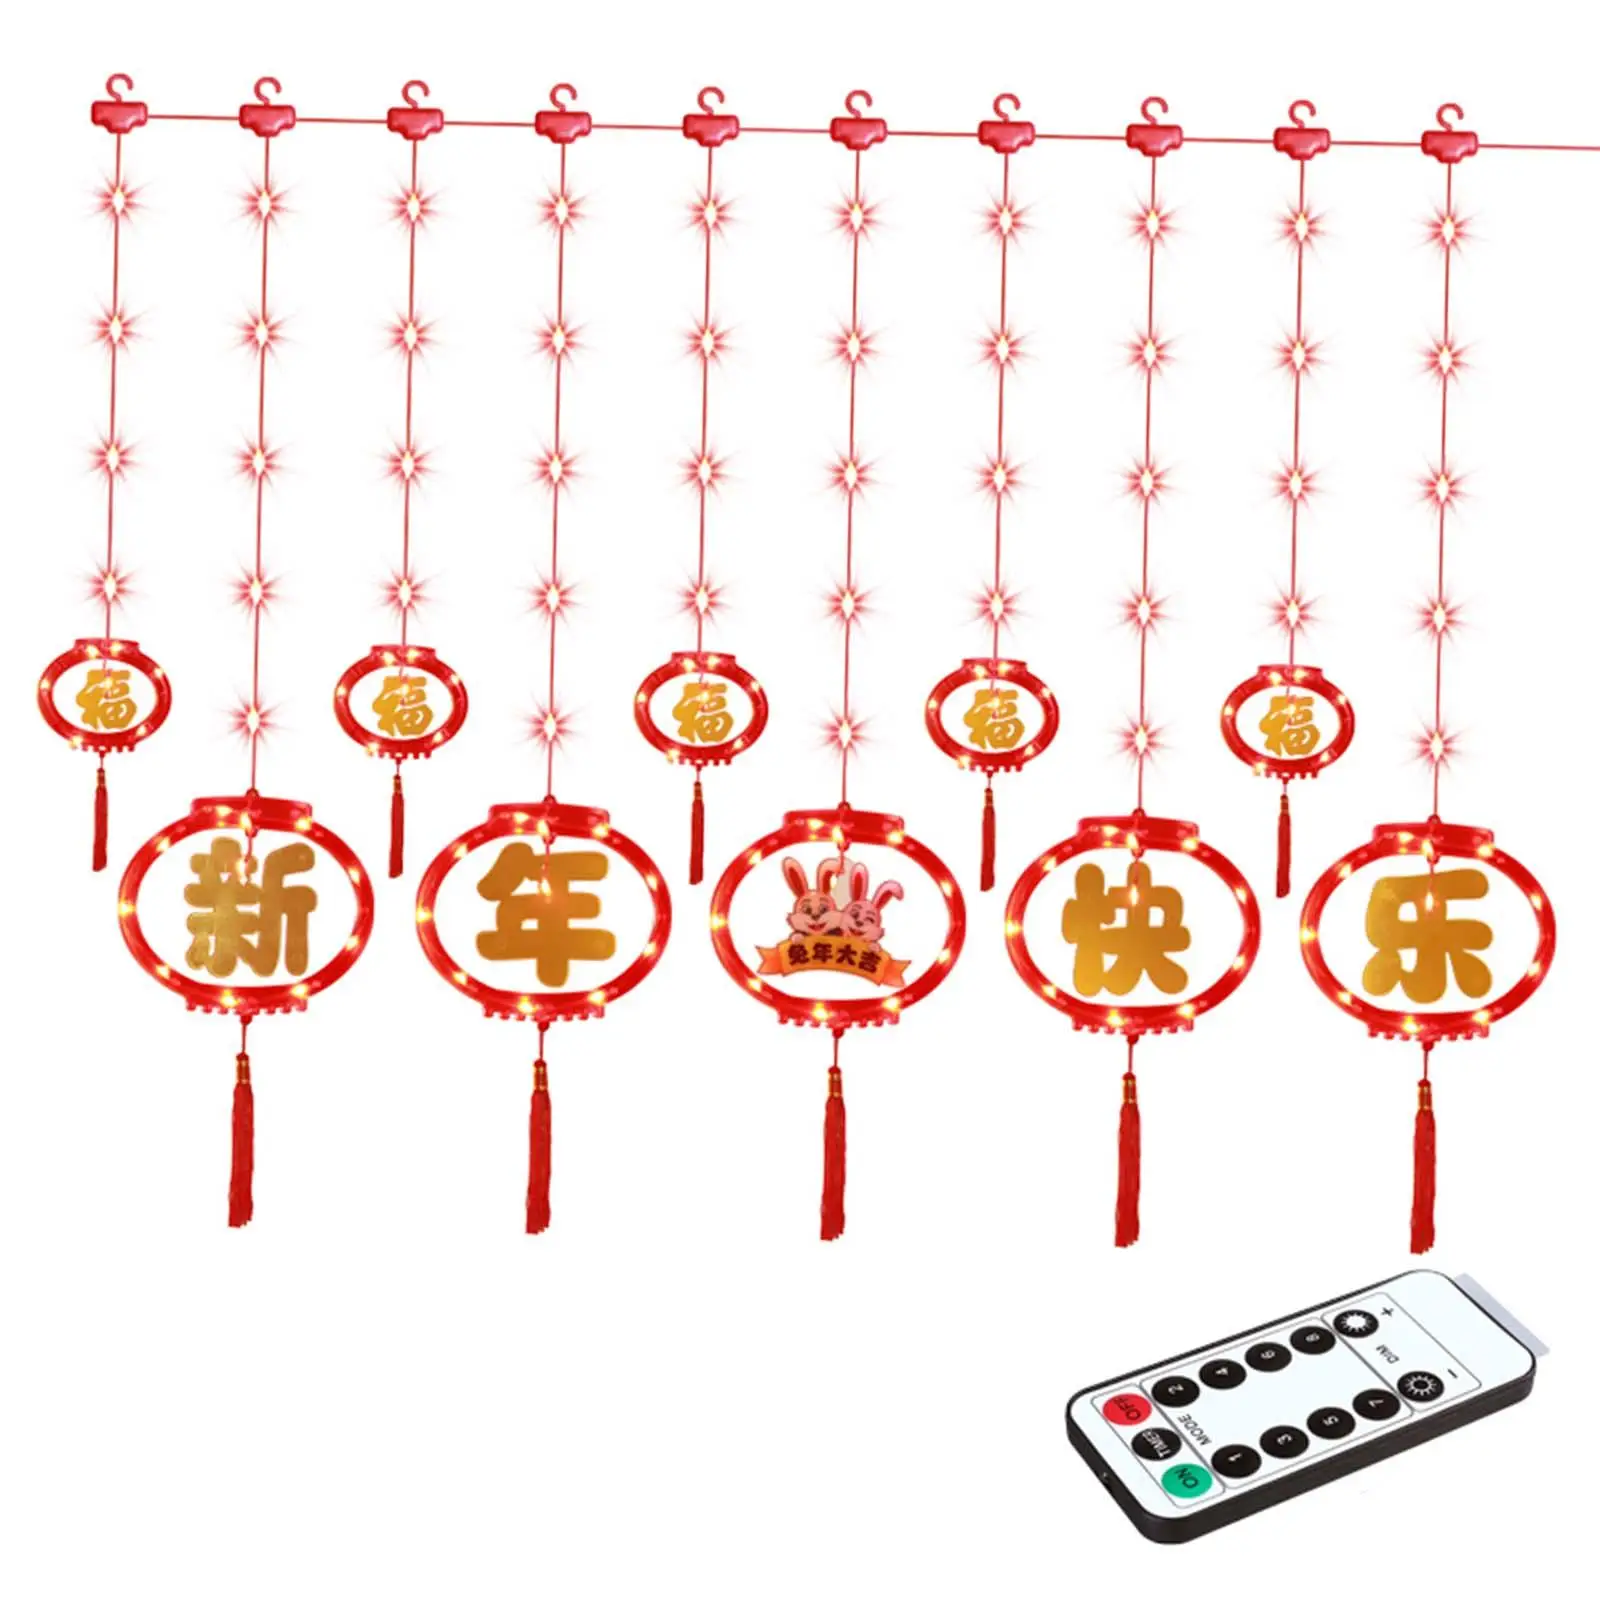 LED Chinese Spring Festival String Light Hanging with Remote Control Ornament Lighting Lamp for Home Yard Porch Bar Decor